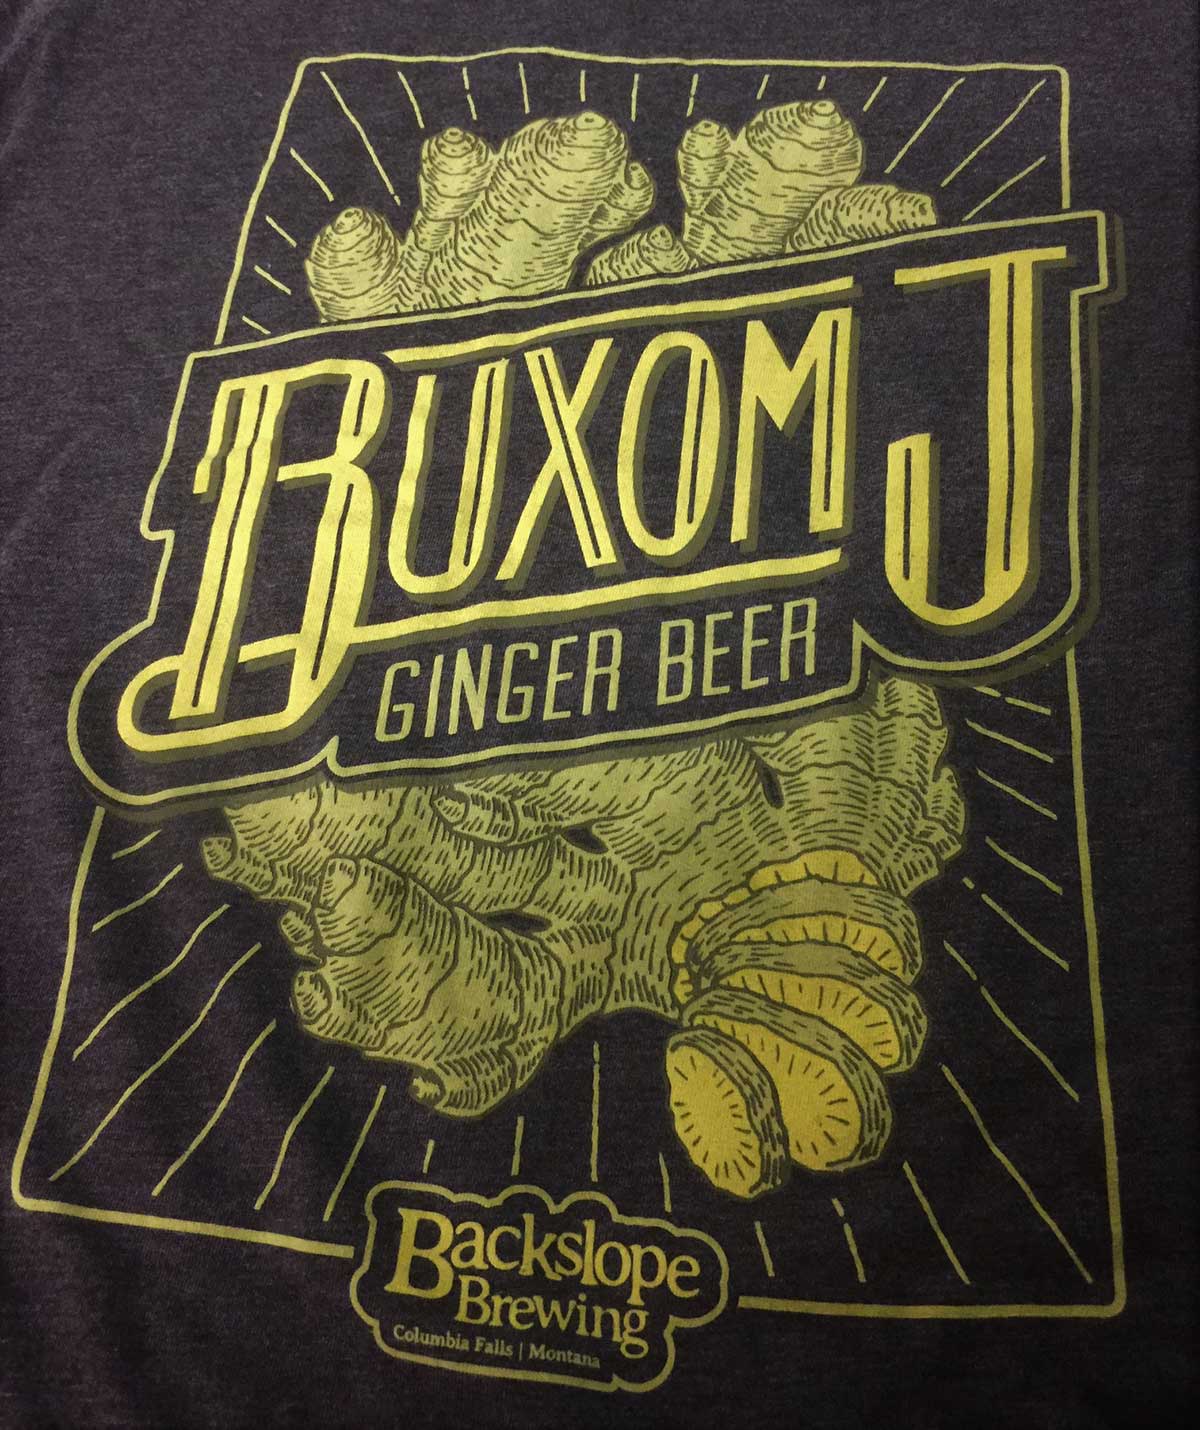 Shirt print for Backslope Brewing in Columbia Falls